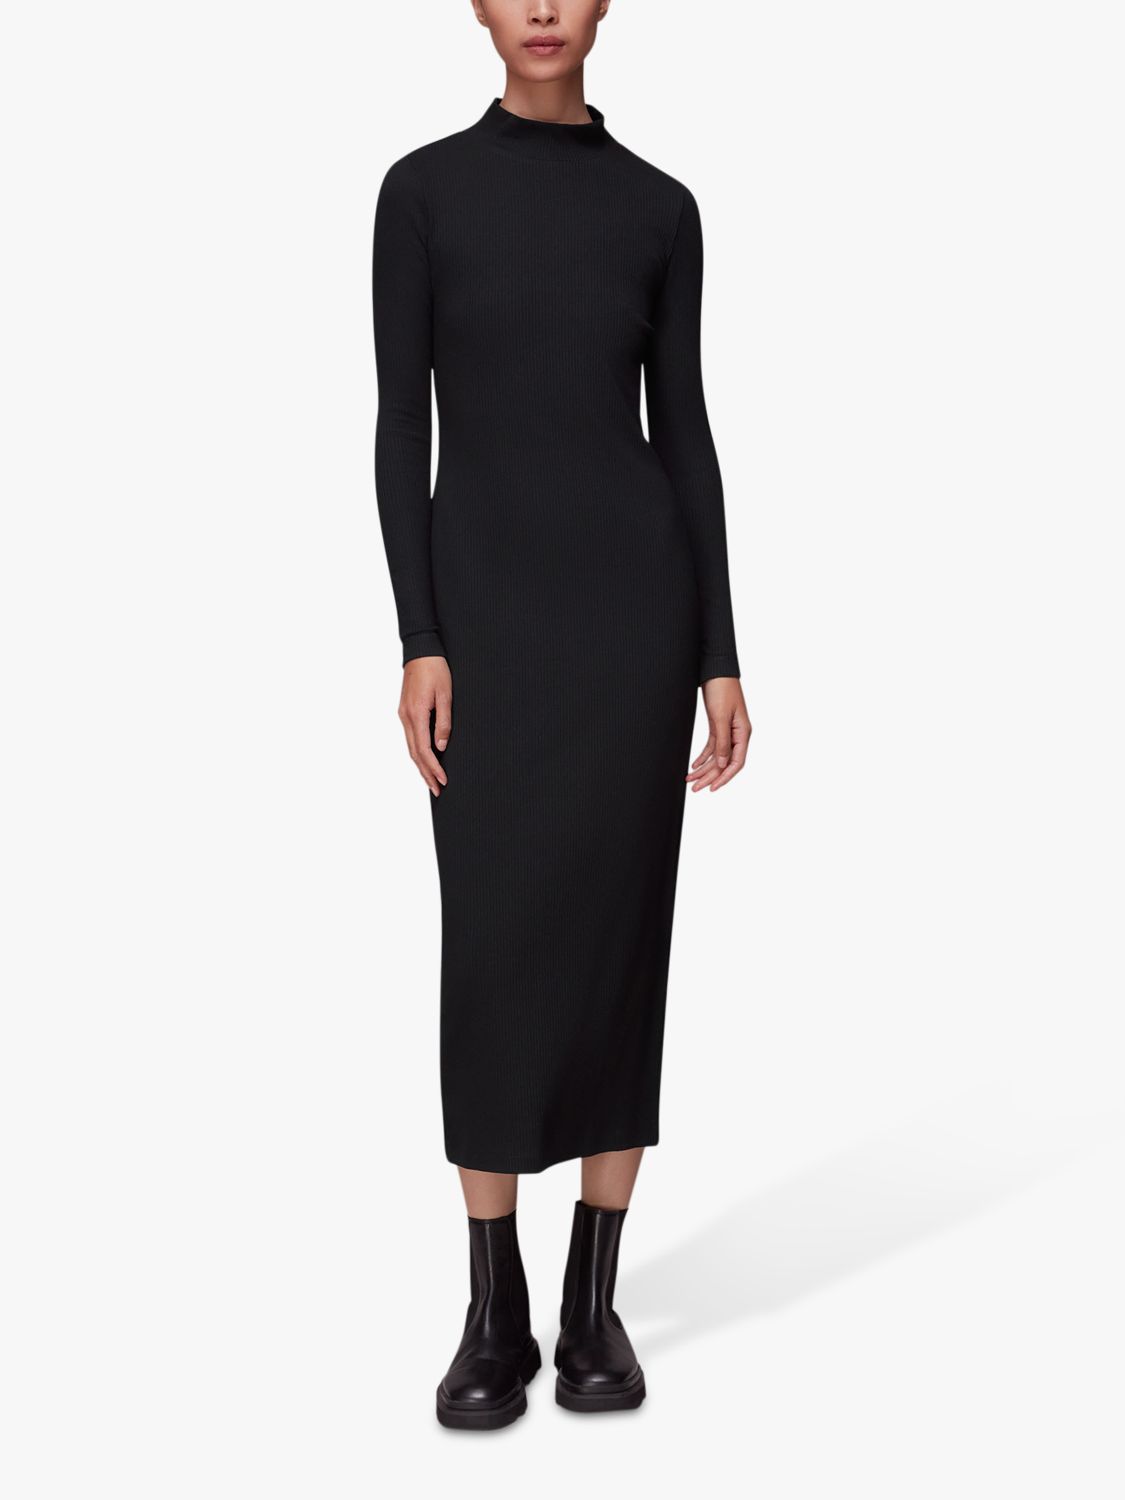 Whistles Ribbed Polo Jersey Dress, Black at John Lewis & Partners